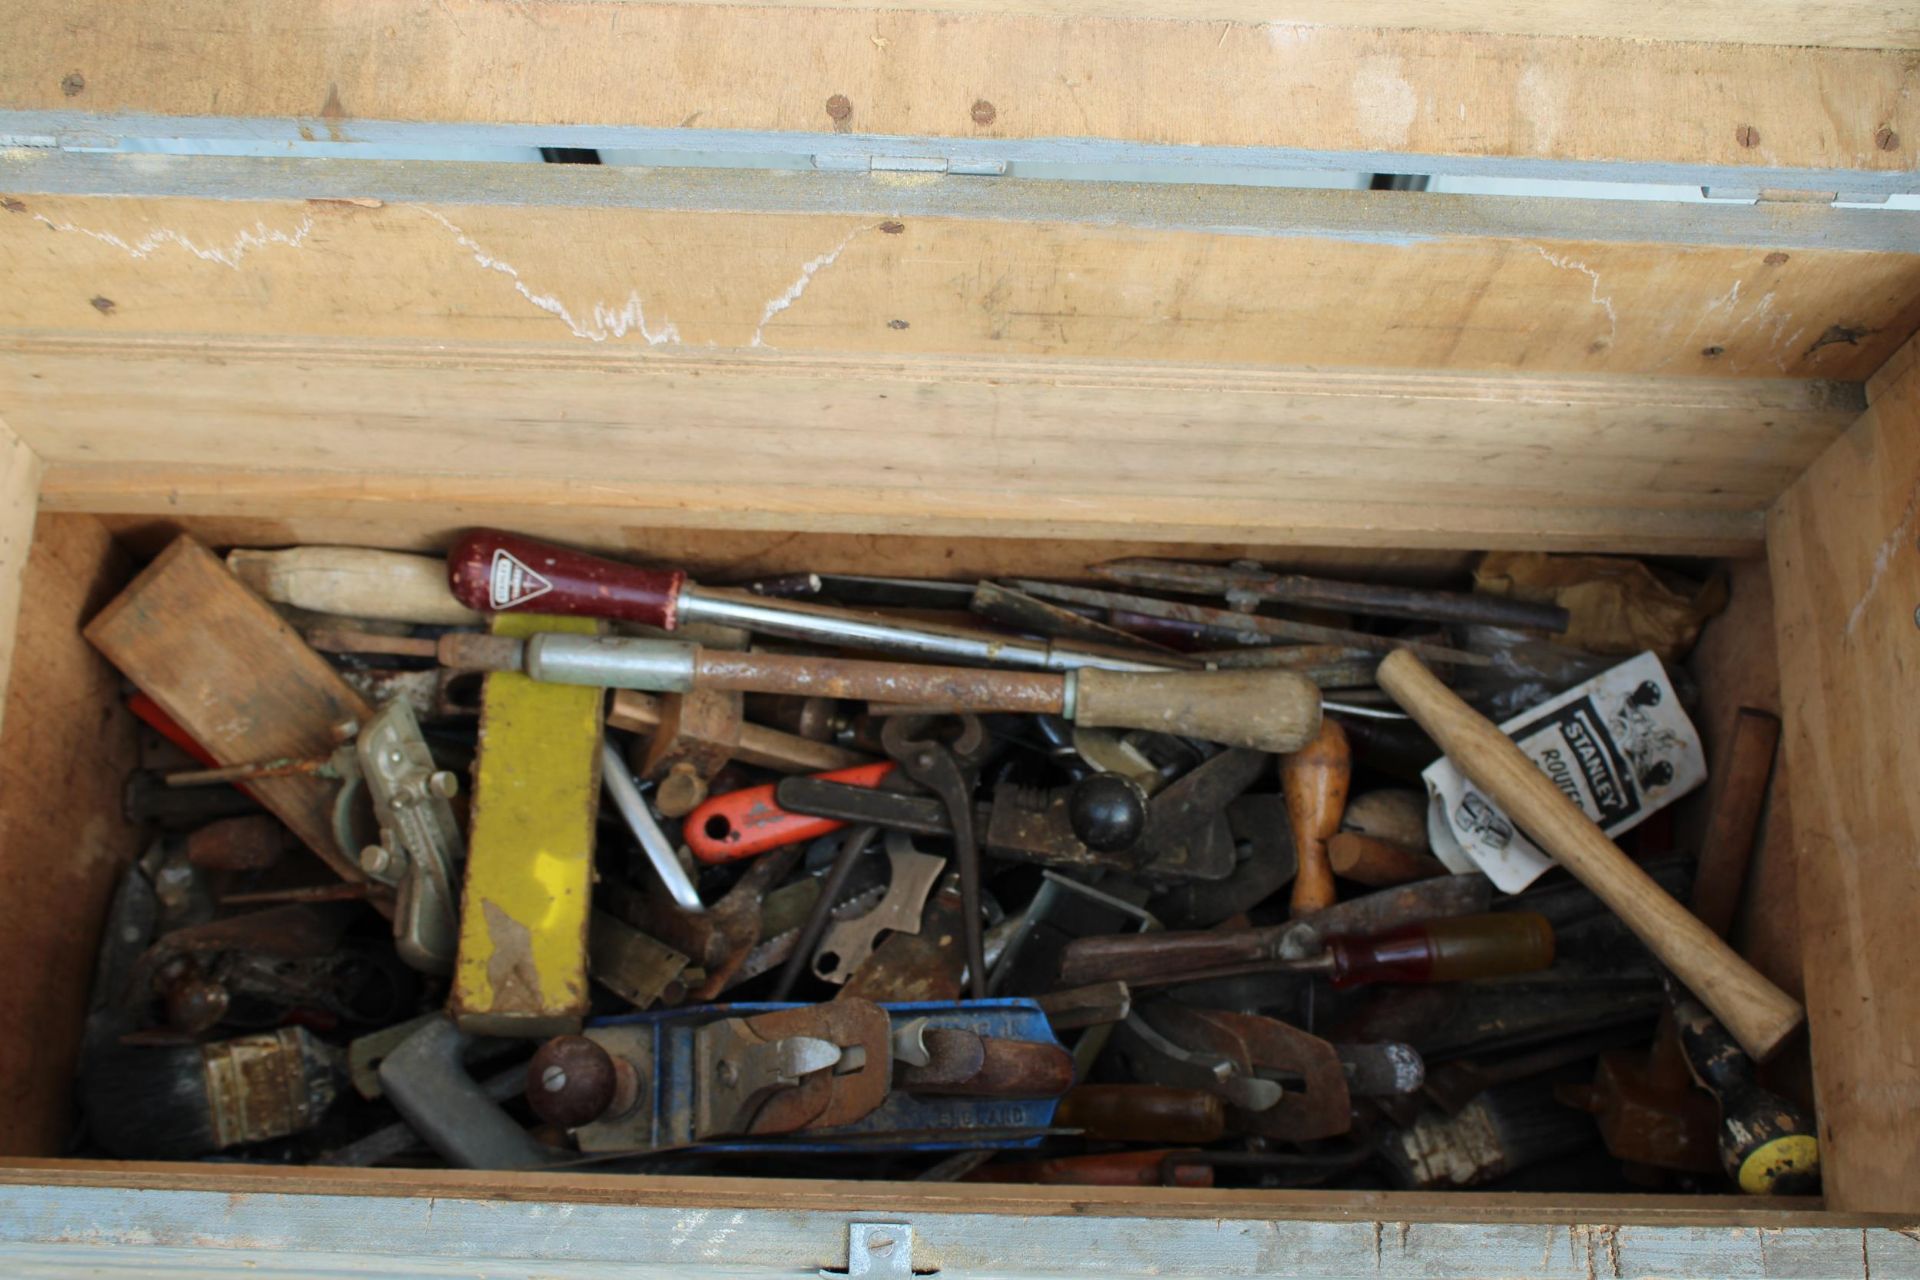 A LARGE WOODEN TOOL CHEST WITH A LARGE ASSORTMENT OF HAND TOOLS TO INCLUDE WOOD PLANES, CHISELS - Image 2 of 3